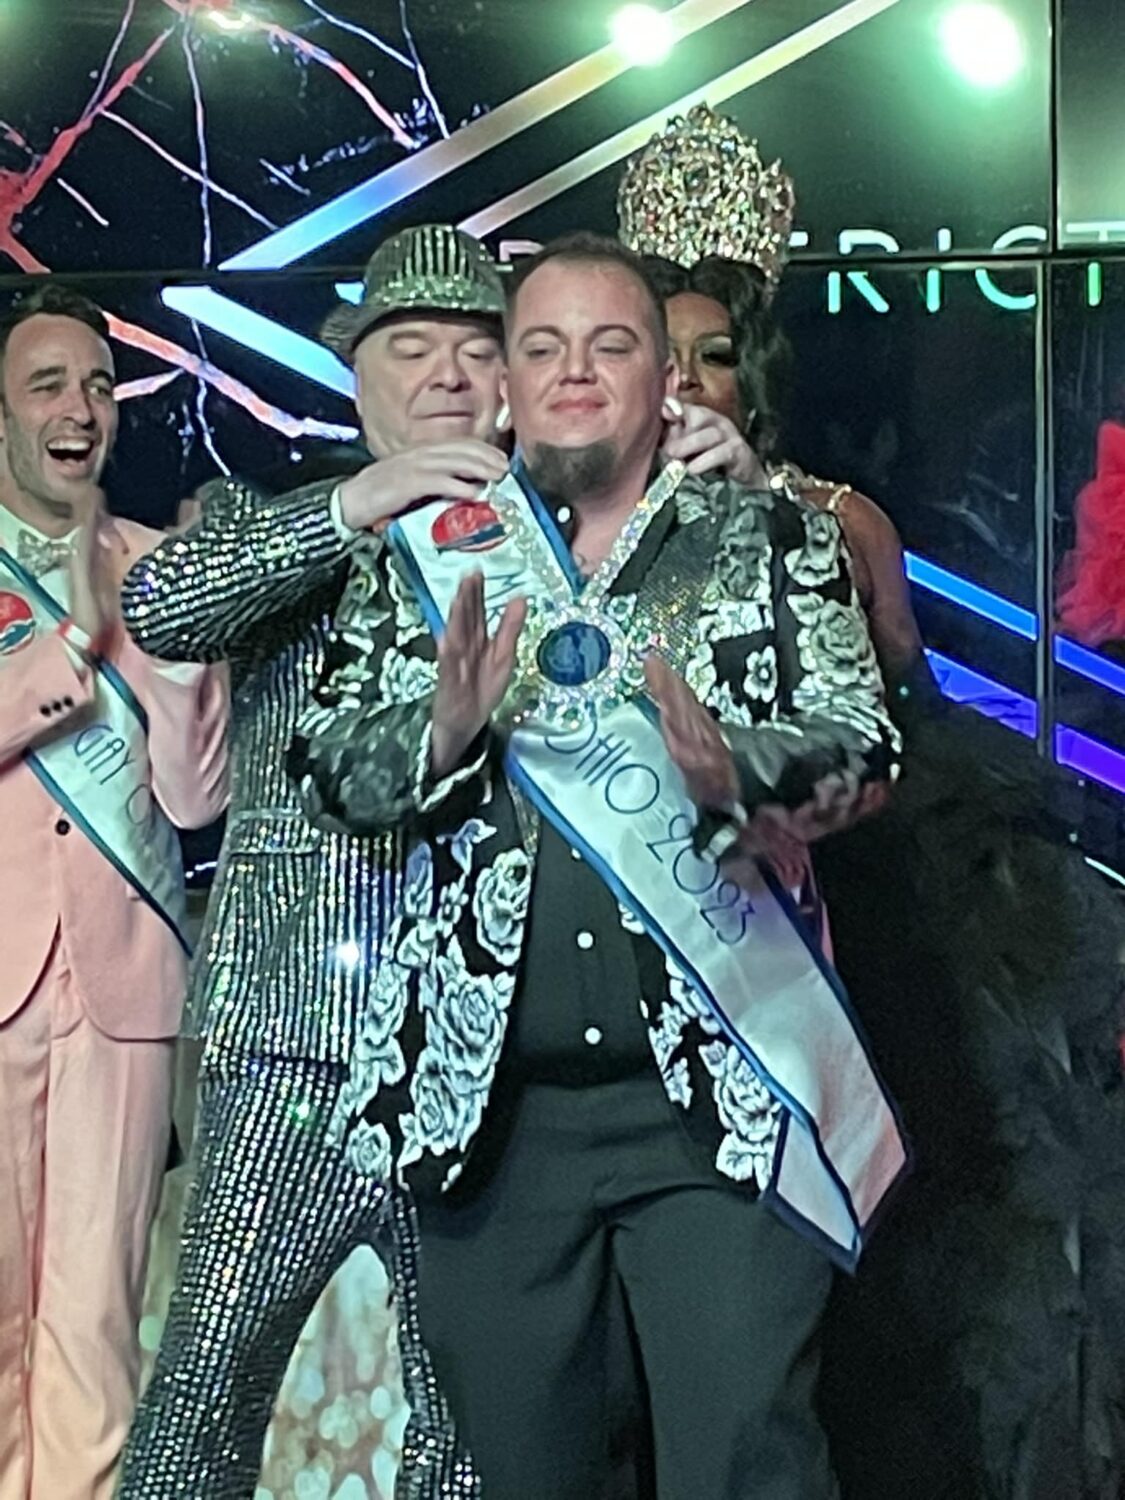 Joey Fleming medals Ty Erup as the new Mr. Gay Ohio.  Former Mr. Gay Ohio, Matthew Allen Meade (far back left), cheers in the background.  | Mr. and Miss Gay Ohio | District West (Columbus, Ohio) | 9/17-9/18/2022